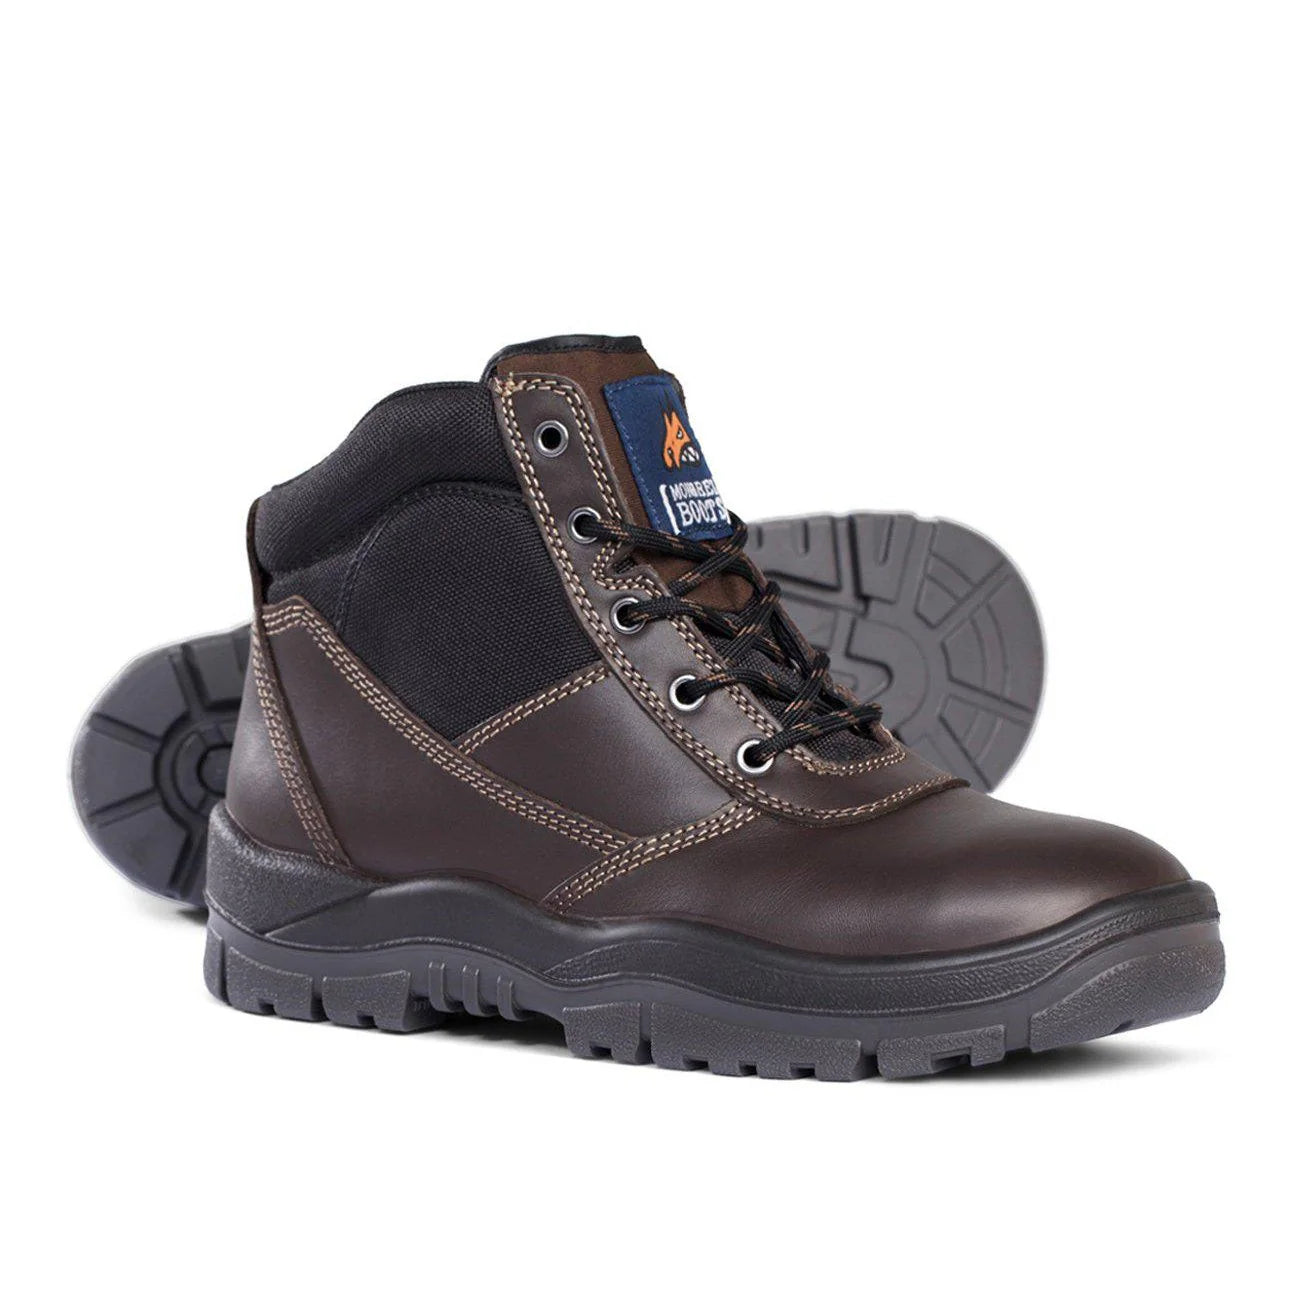 Mongrel 260030 Lace Up Safety Boot